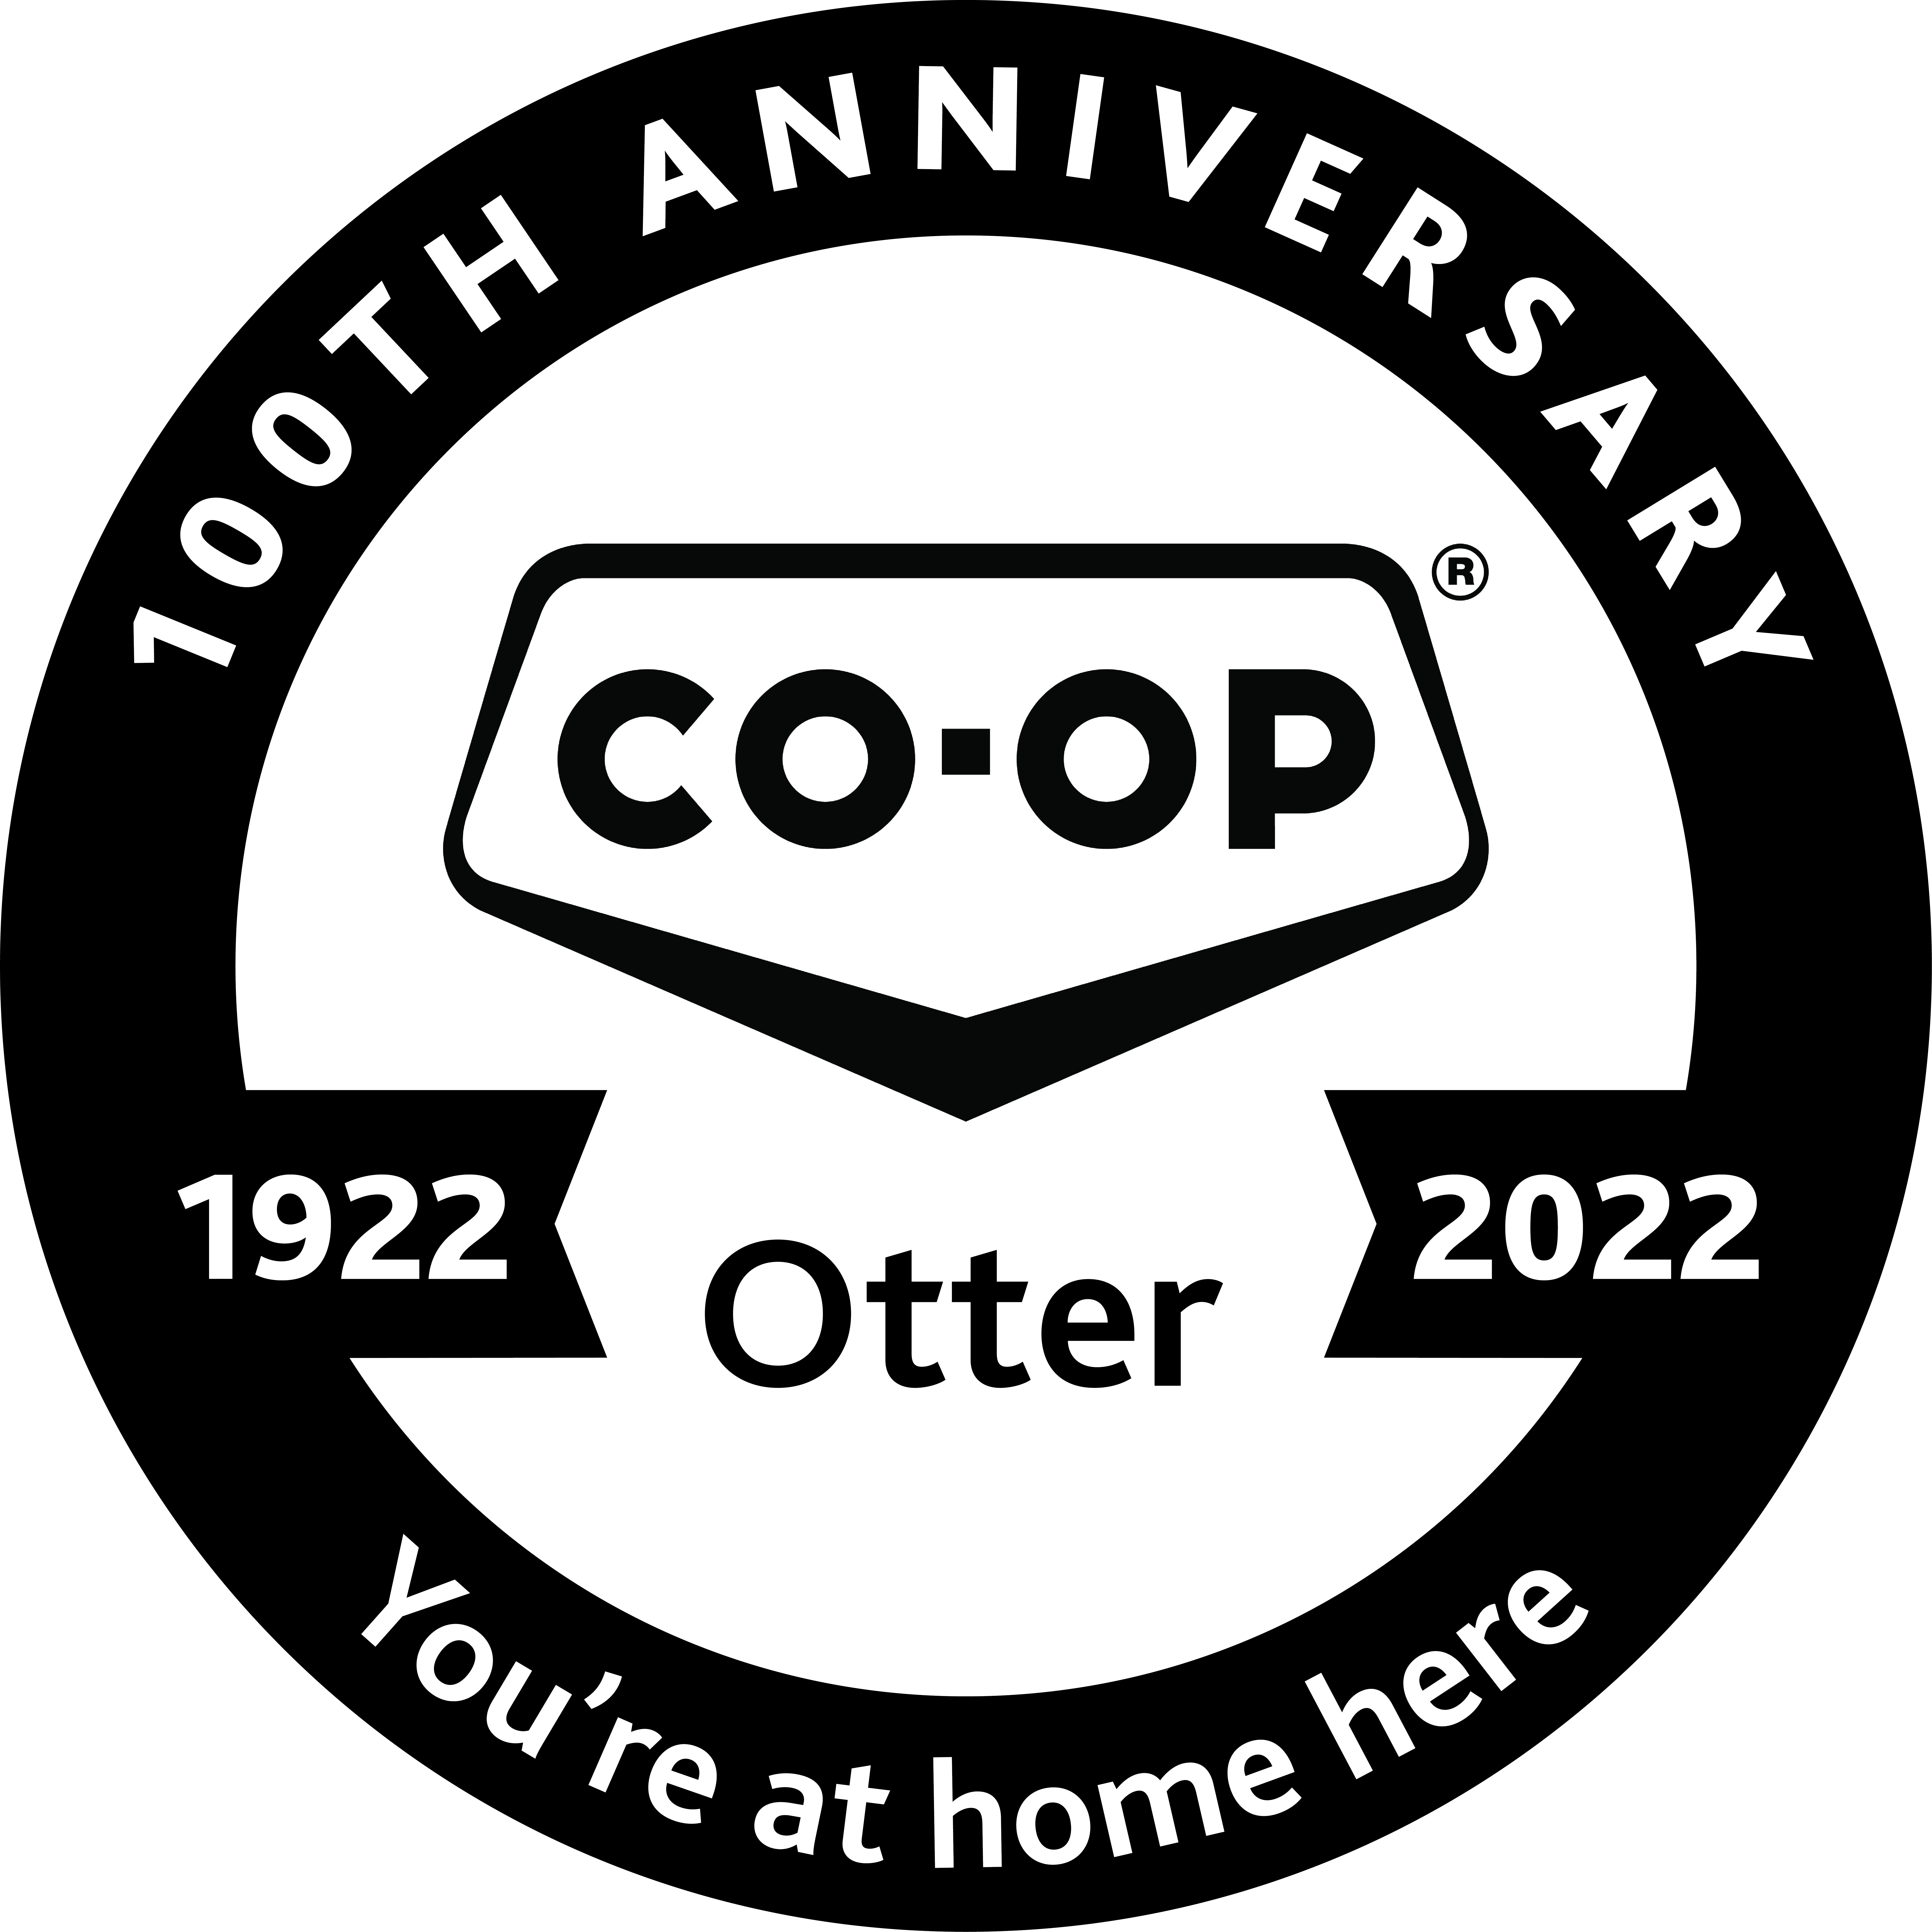 Image for Otter Co-op returning over $5.9 million of profits to members in cash and equity for their 2021 purchases